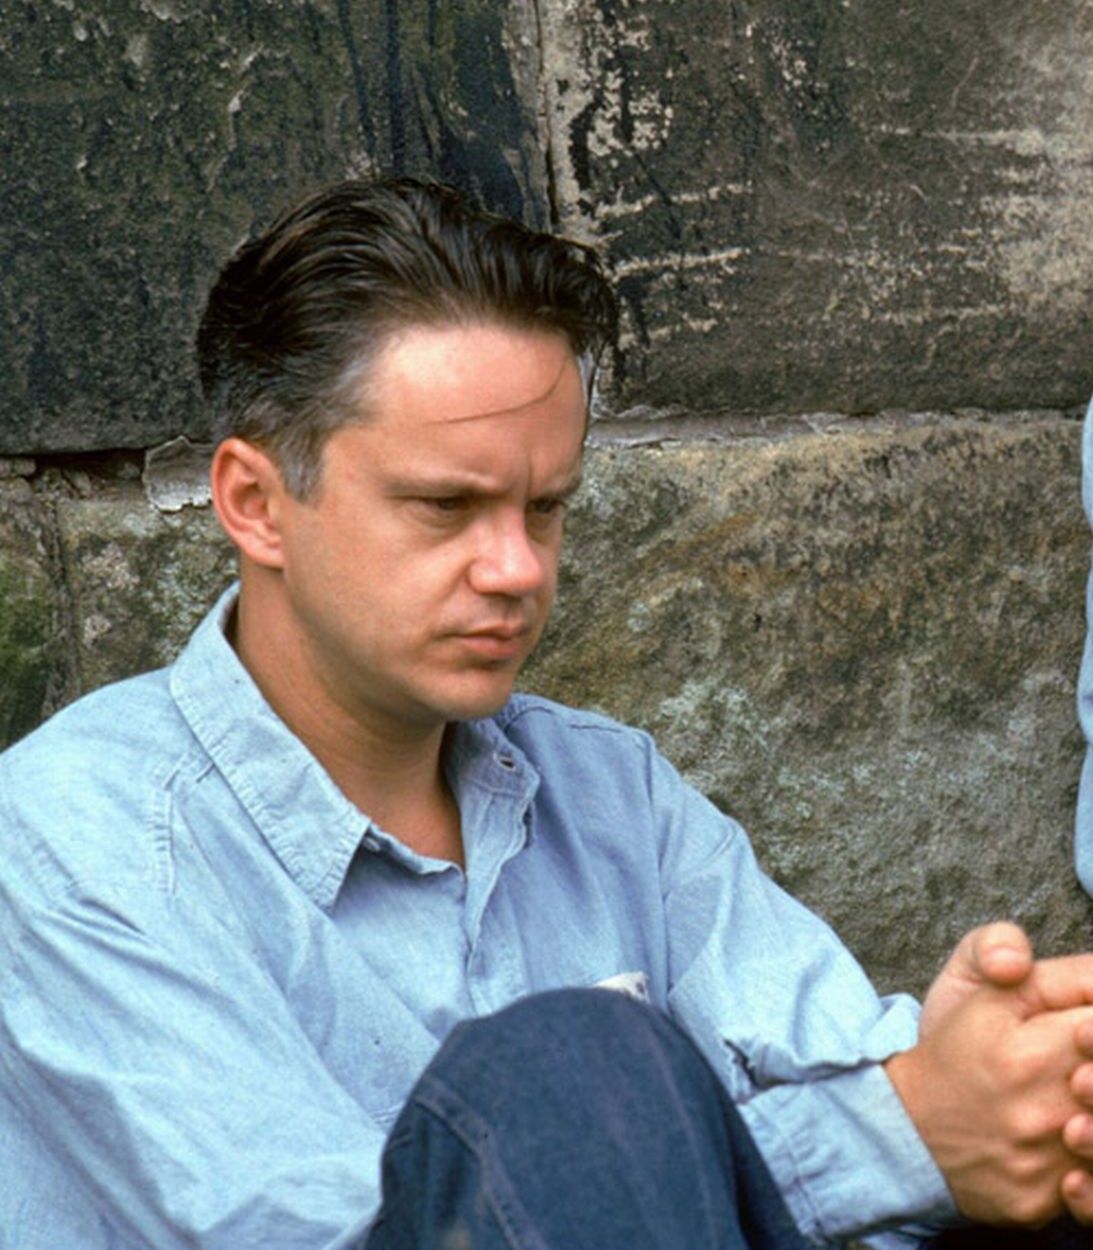 Tim Robbins as Andy Dufresne and Morgan Freeman as Red in The Shawshank Redemption vertical